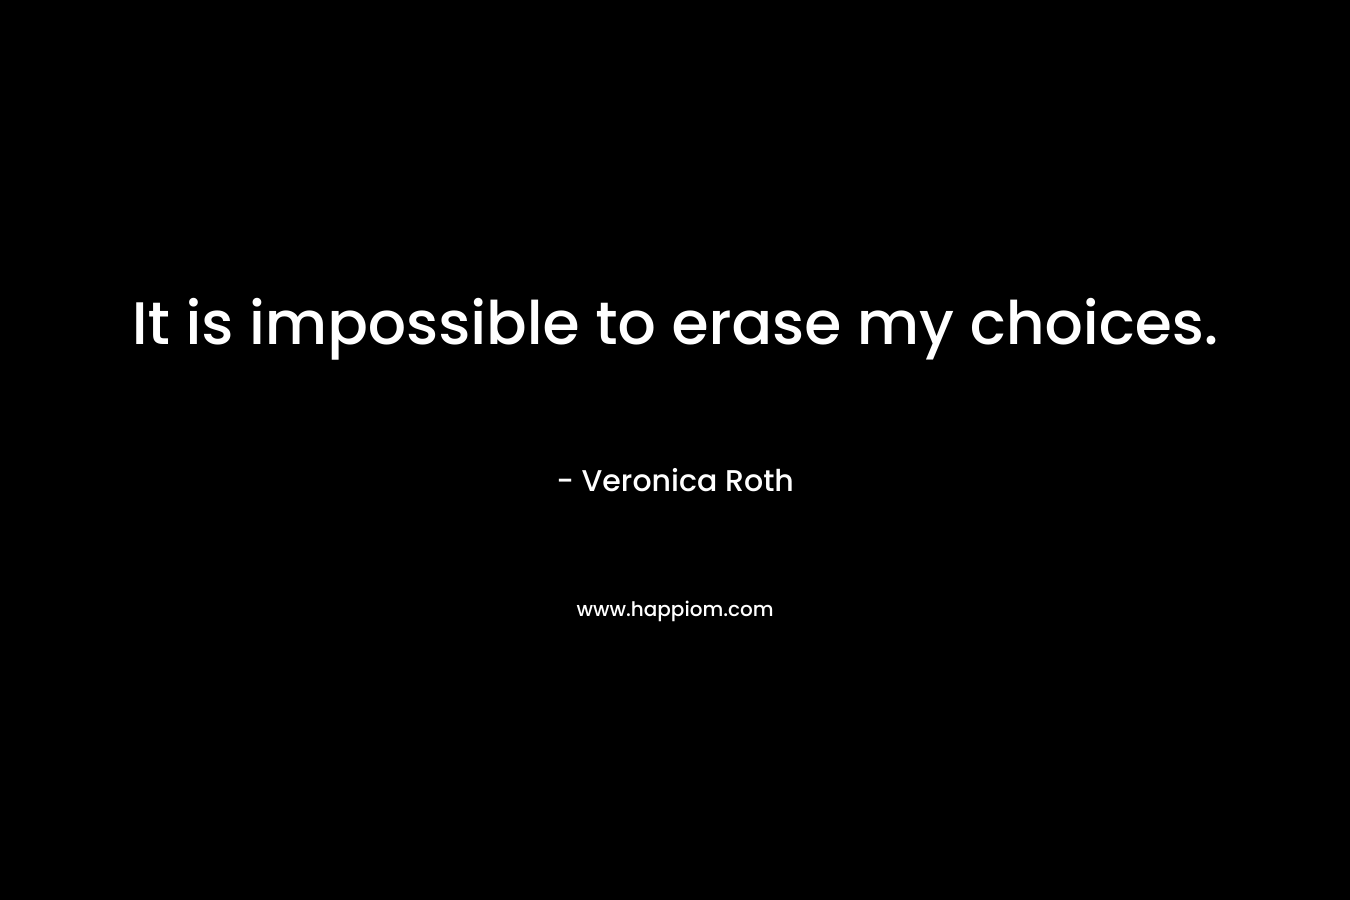 It is impossible to erase my choices. – Veronica Roth